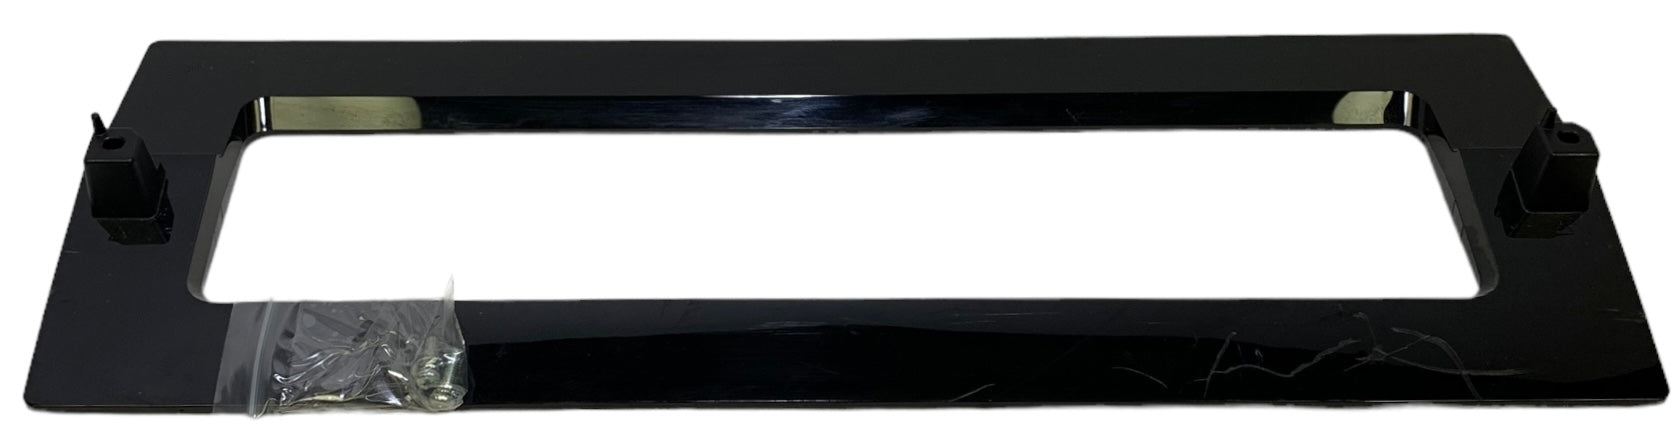 Sony KDL-40R450A TV Stand/Base